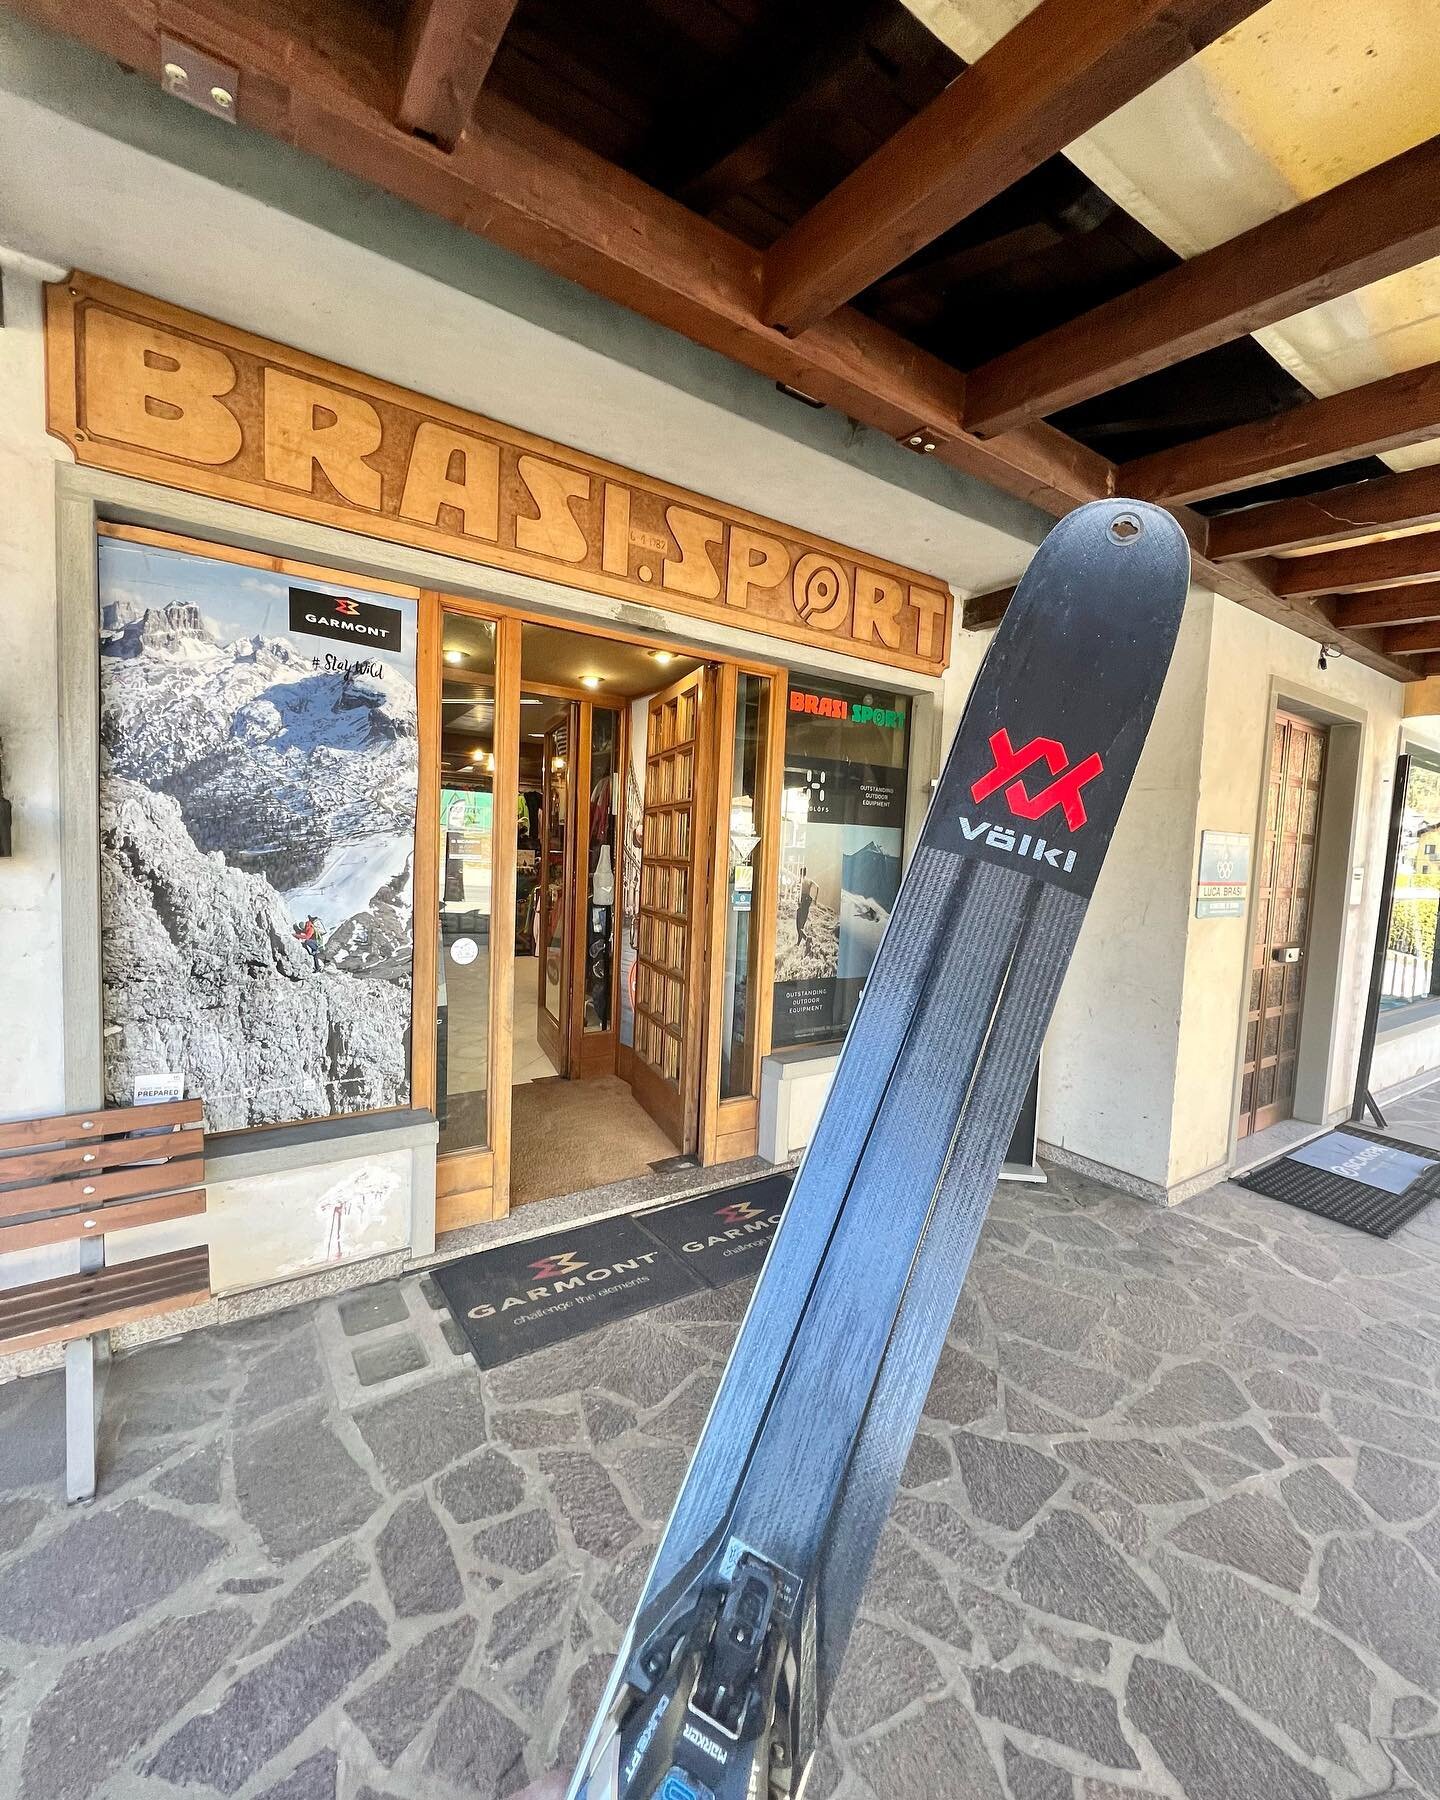 Last week I ran out of talent on a ski tour in the Aiguilles Rouges @chamonixmontblanc resulting in an impact with a rock denting and deforming the edge of my fantastic @voelklskis - I was told in Chamonix by a very high profile shop that they couldn